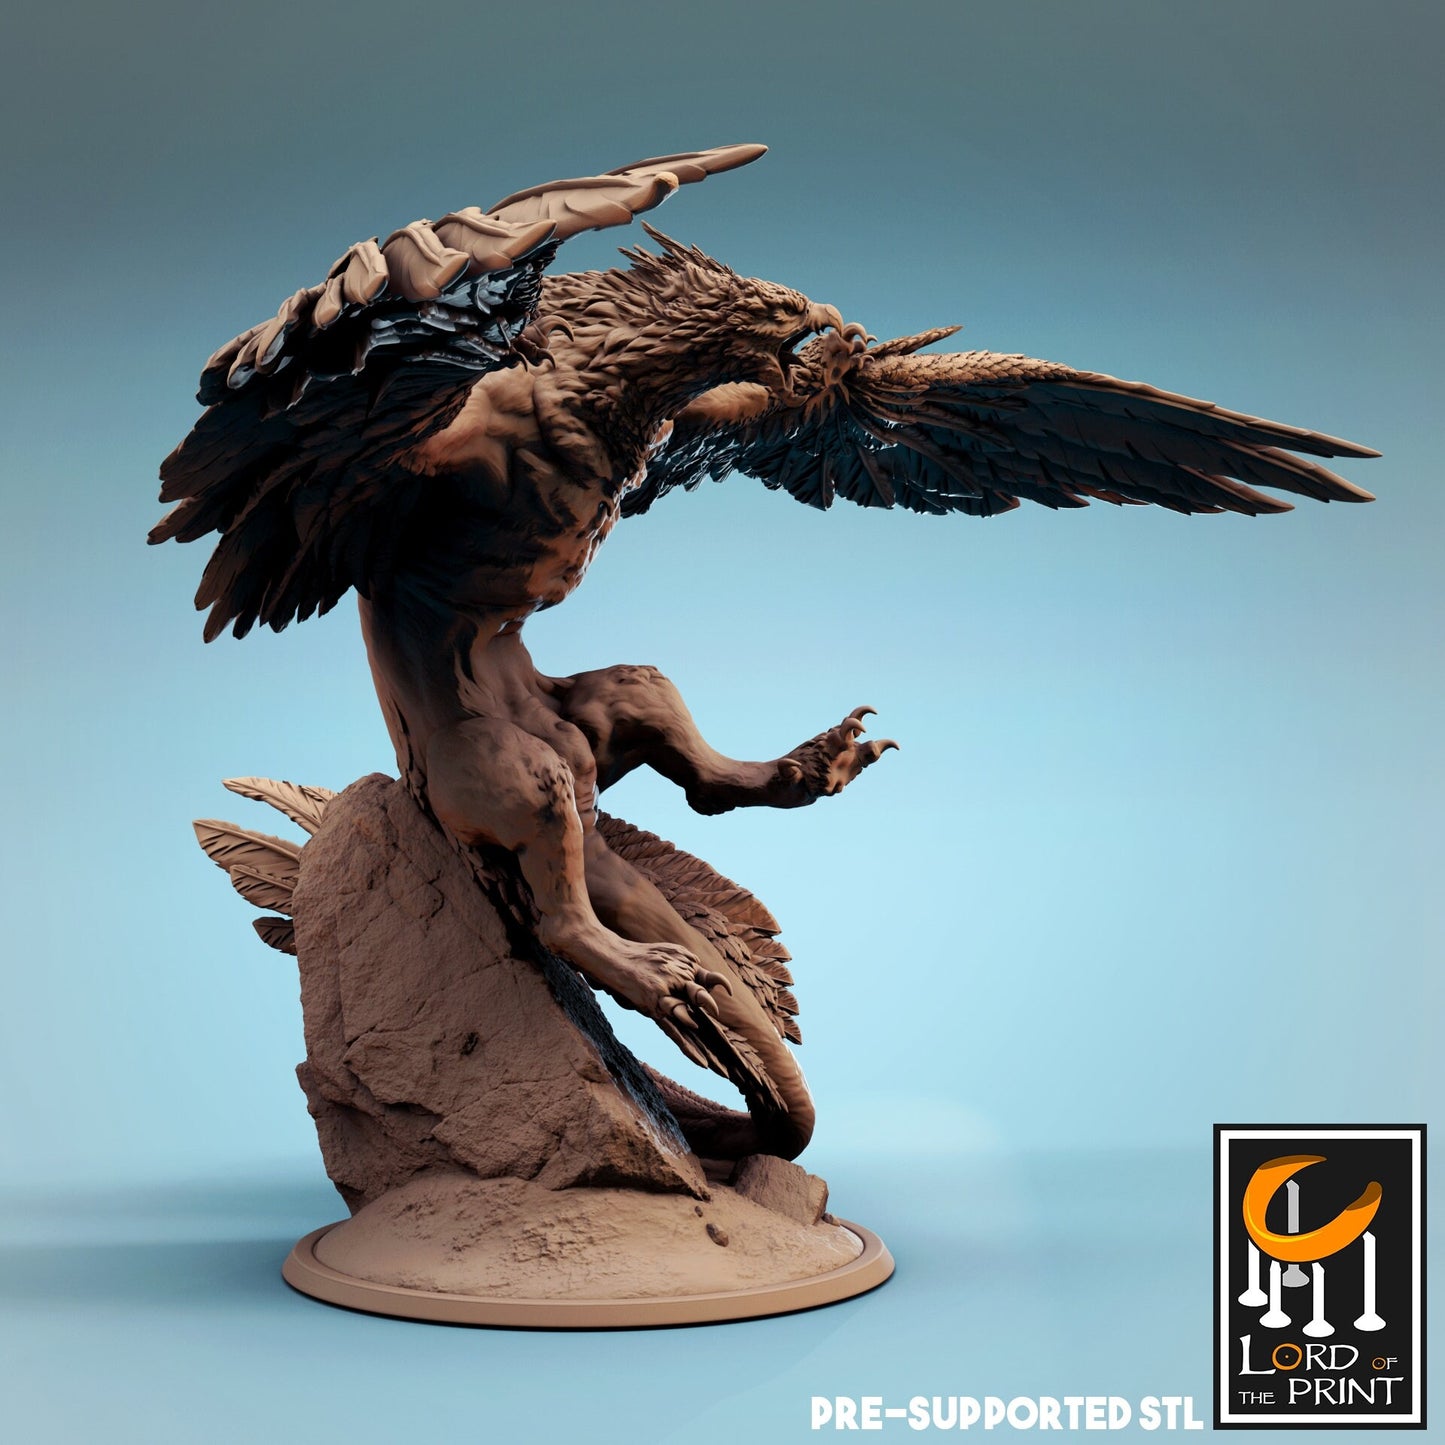 Griphon Male/Female from Lord of the Print/ Ideal for Dungeons and Dragons/ D&D / Wargaming